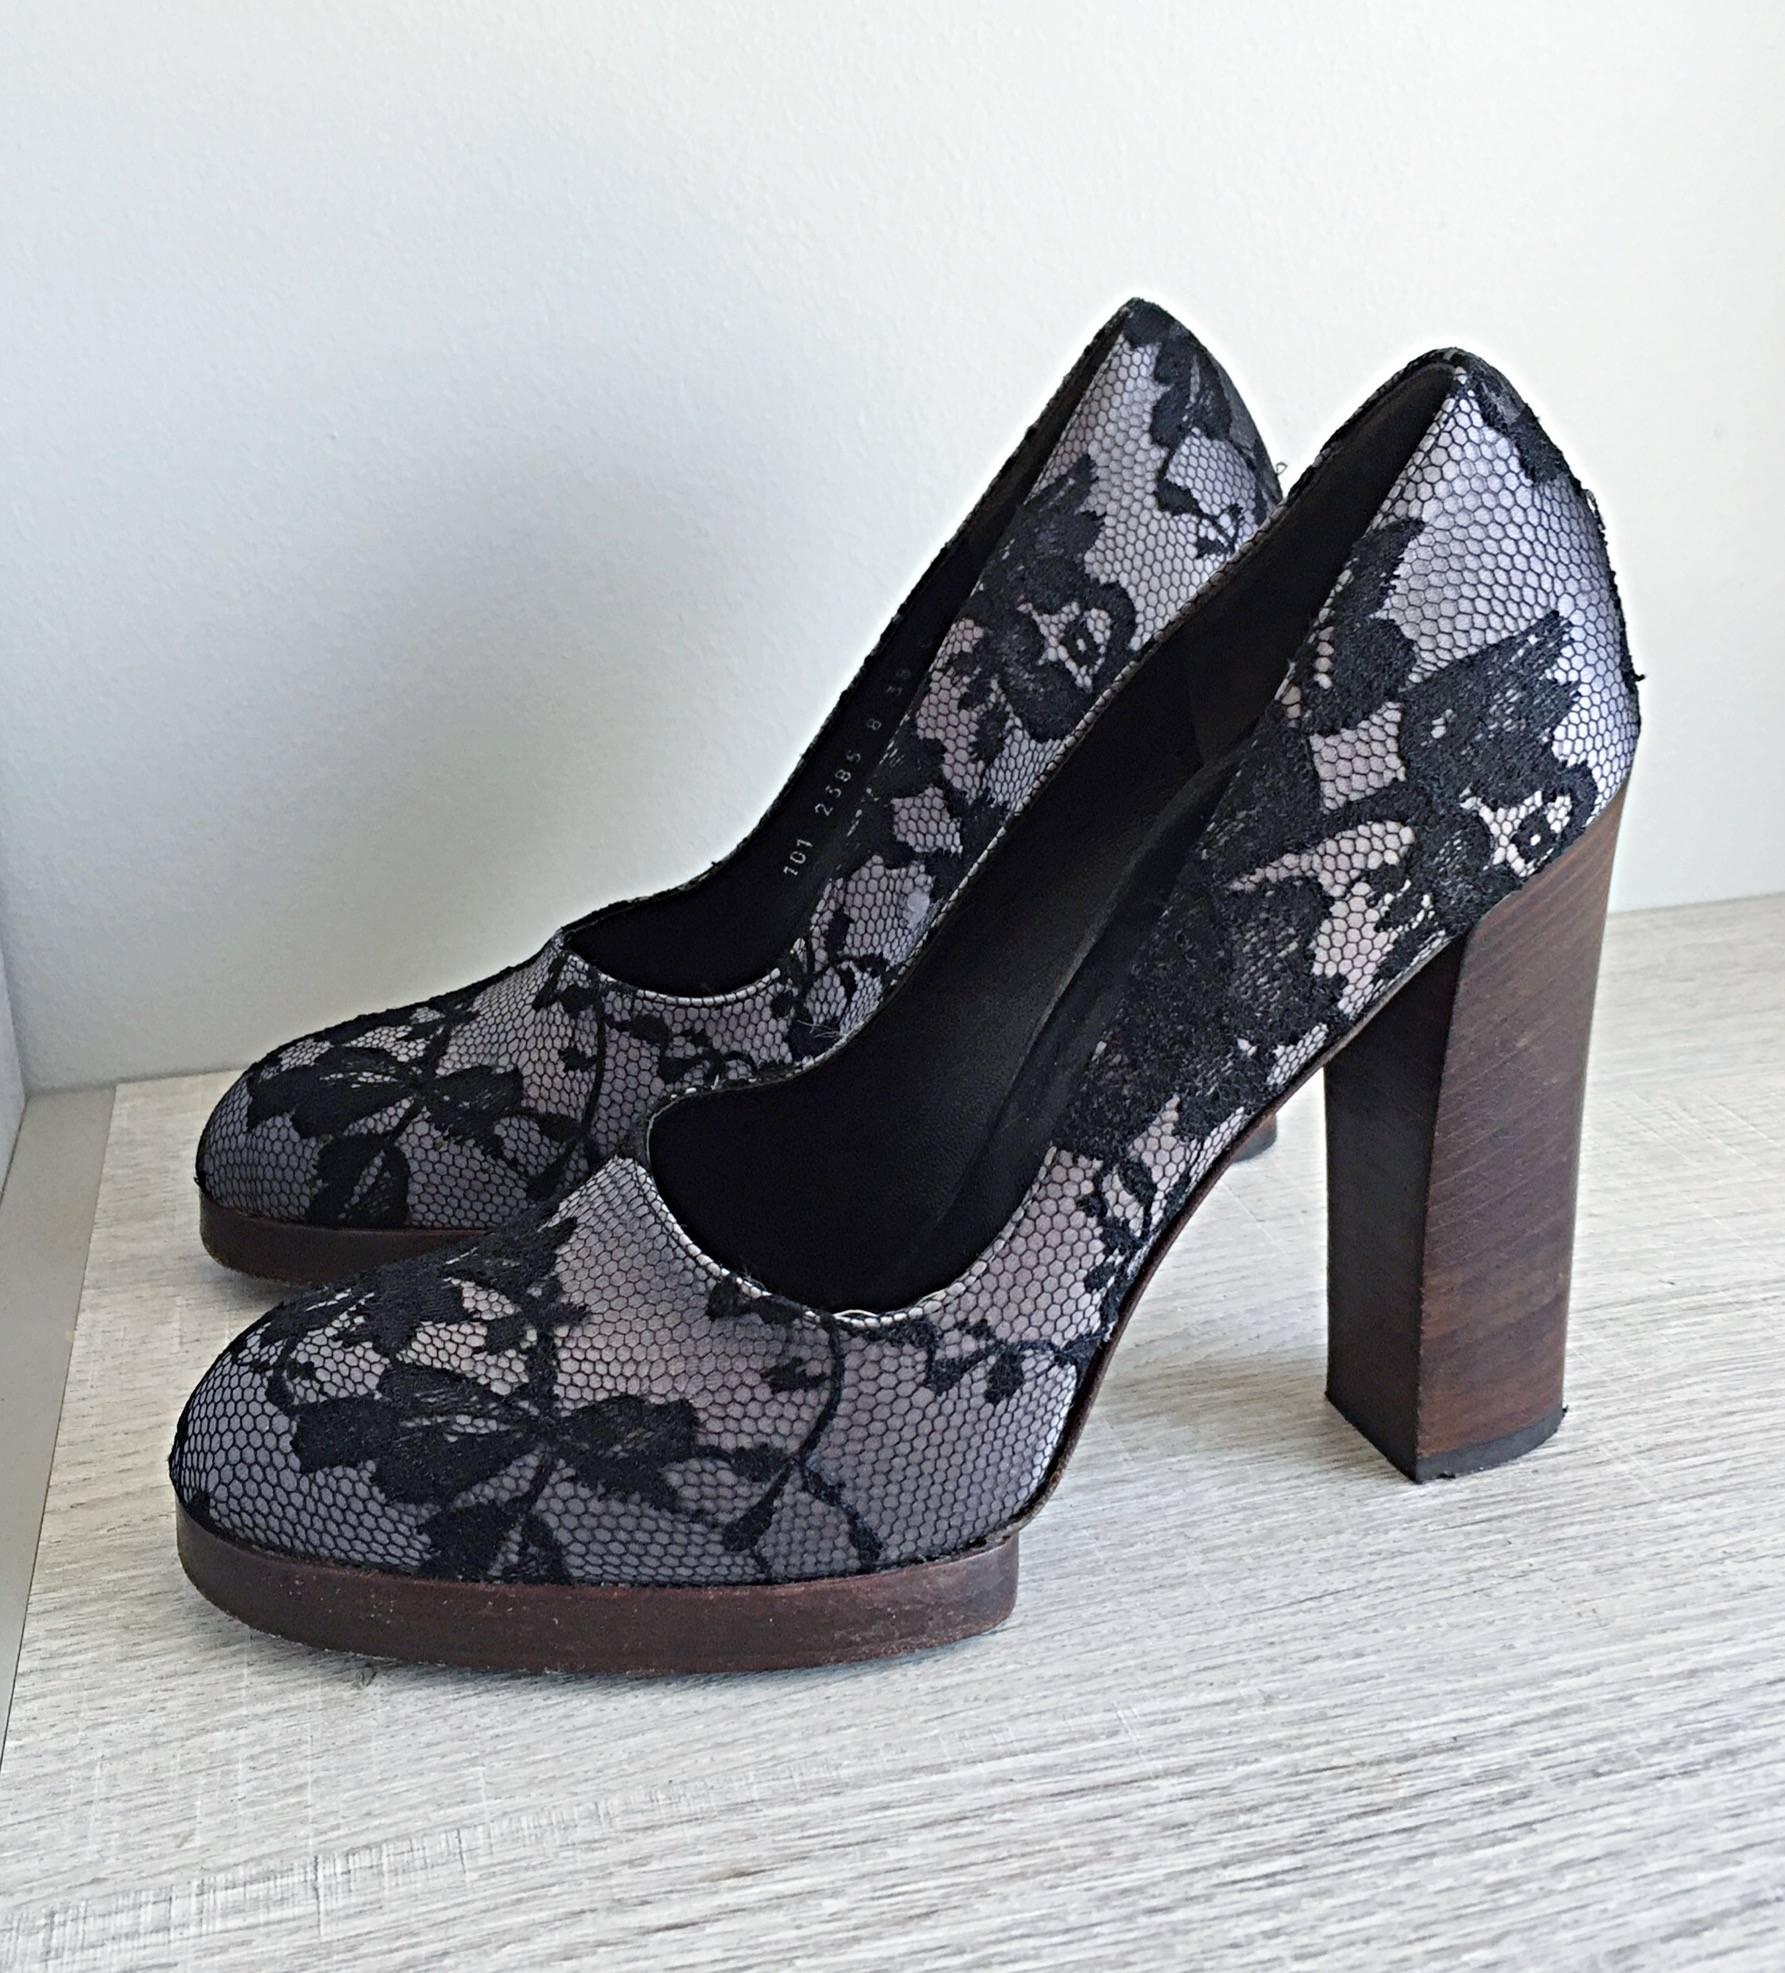 Rare TOM FORD for GUCCI early 2000s black and gray lace shoes! Beautiful gray silk, with an overlay of black French lace. Stacked wooden heel makes for a very comftorable heel. Looks great with jeans, a skirt, or a dress. Can easily transition from